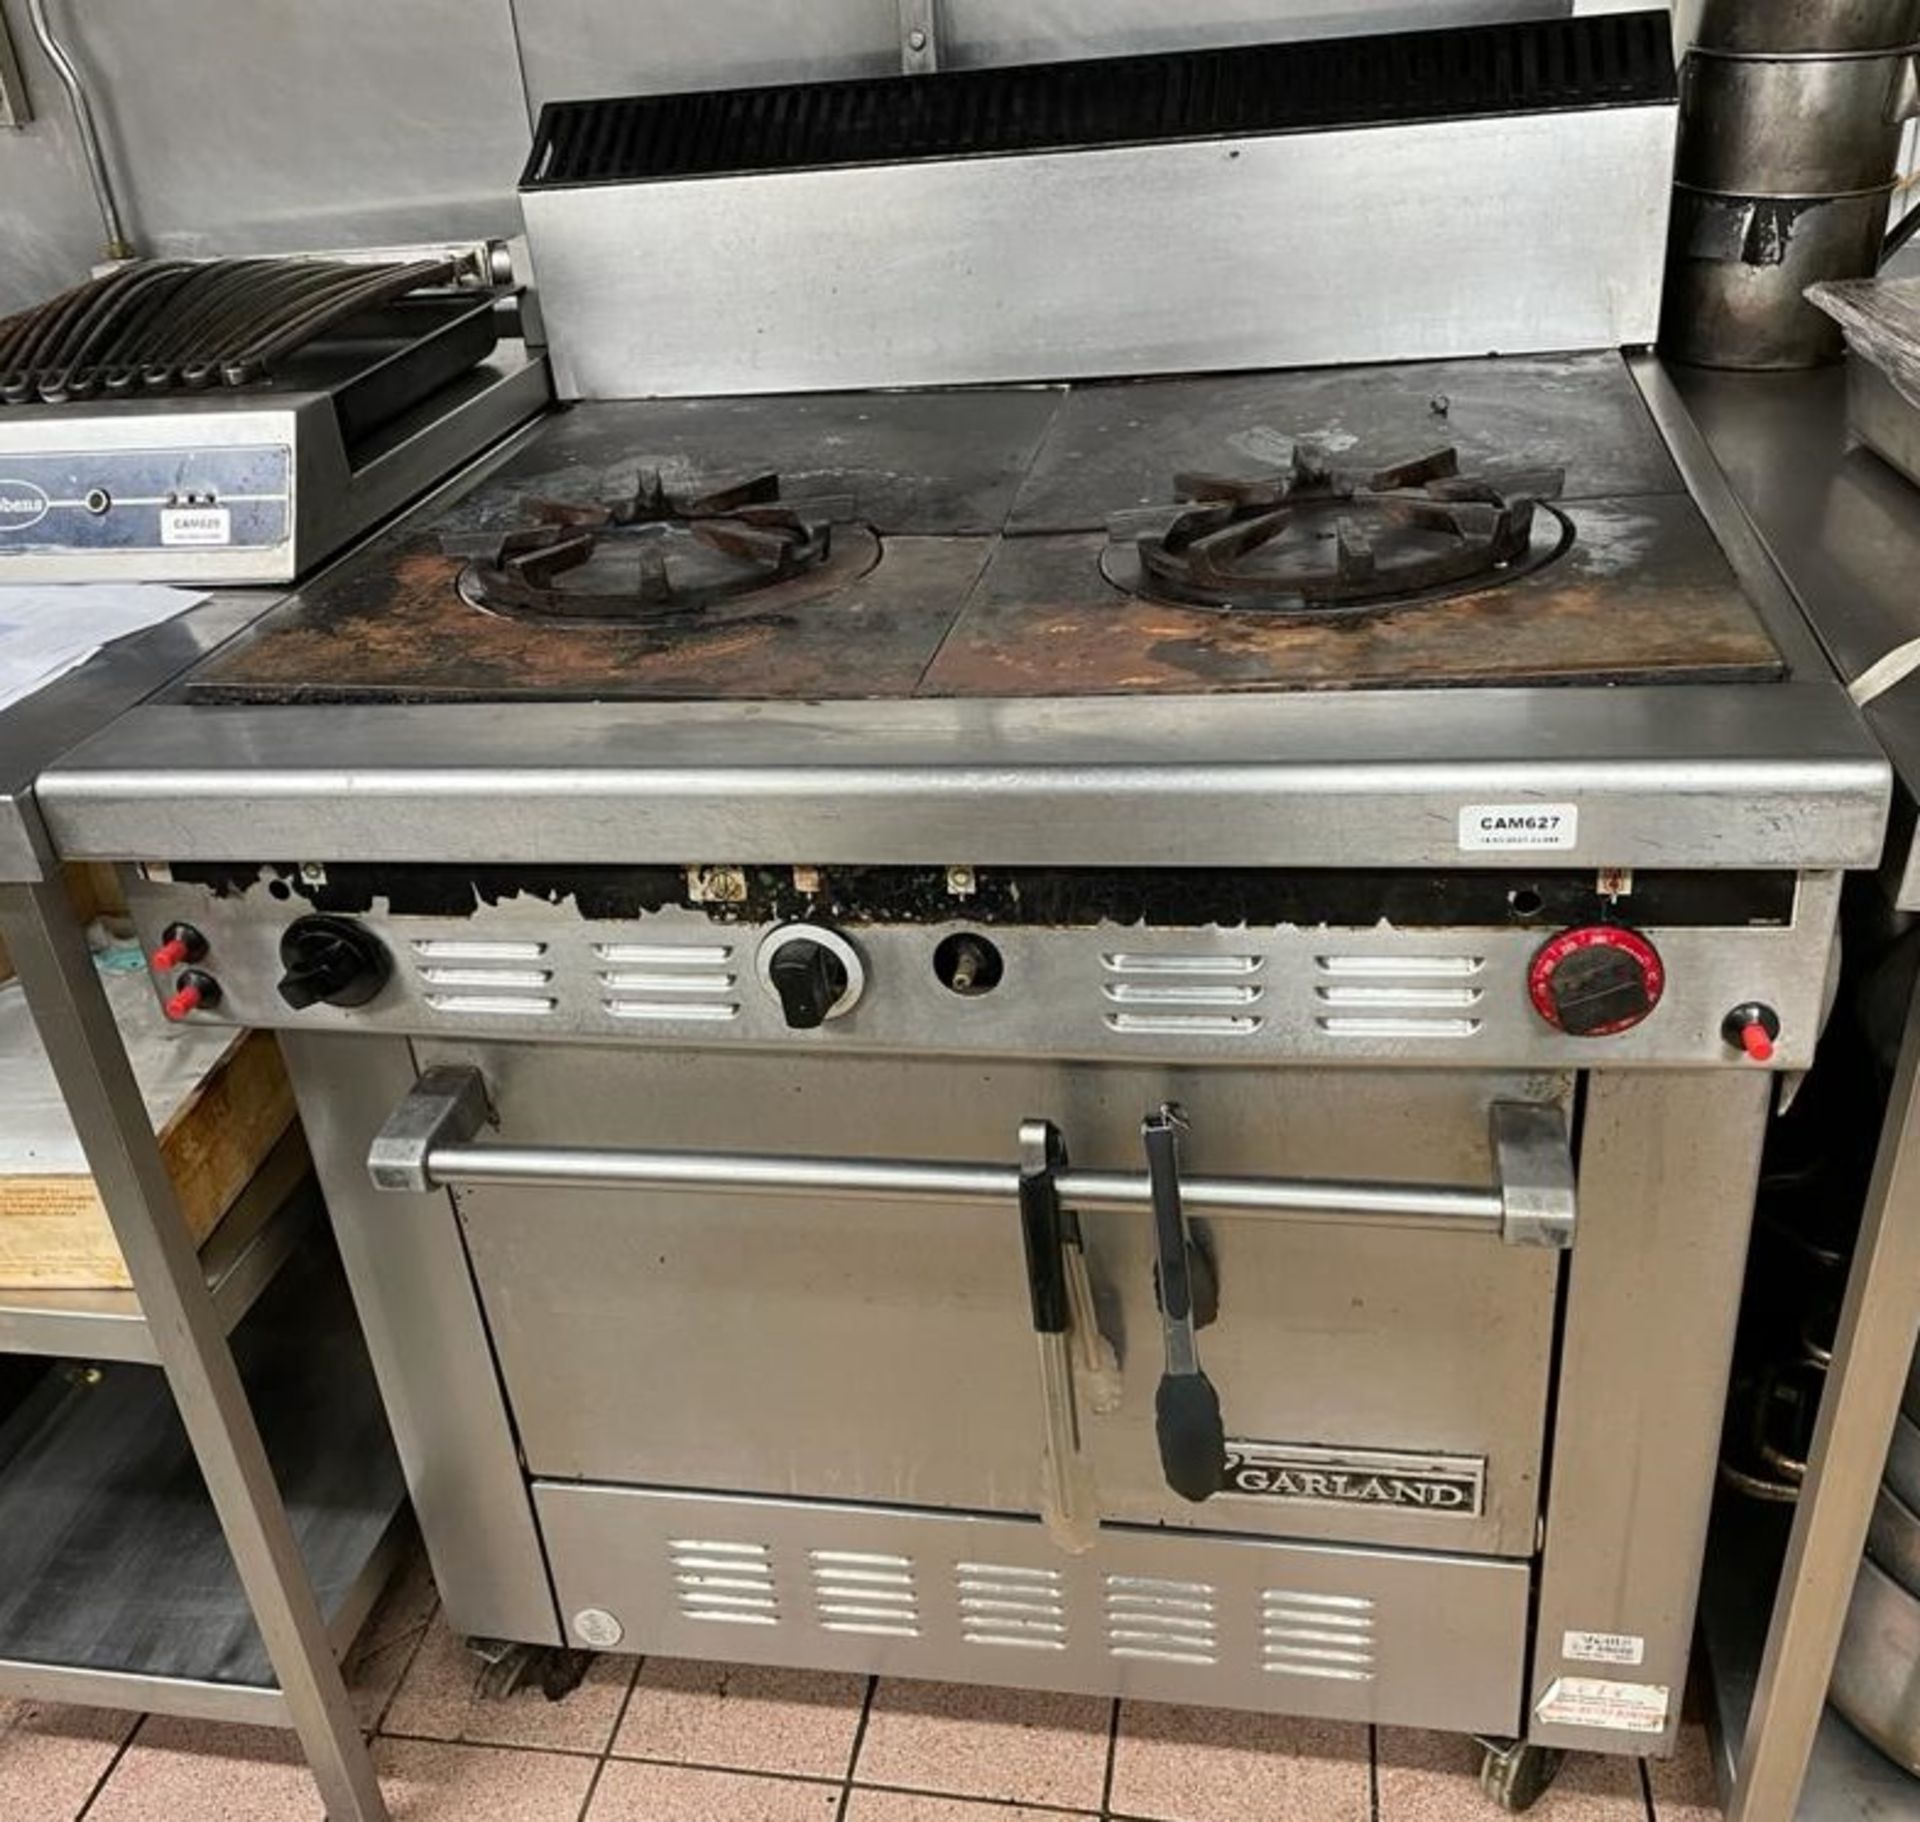 1 x GARLAND Commercial Gas Oven With Double Griddle Hob - Ref: CAM627 - CL612 - Location: London - Image 7 of 7